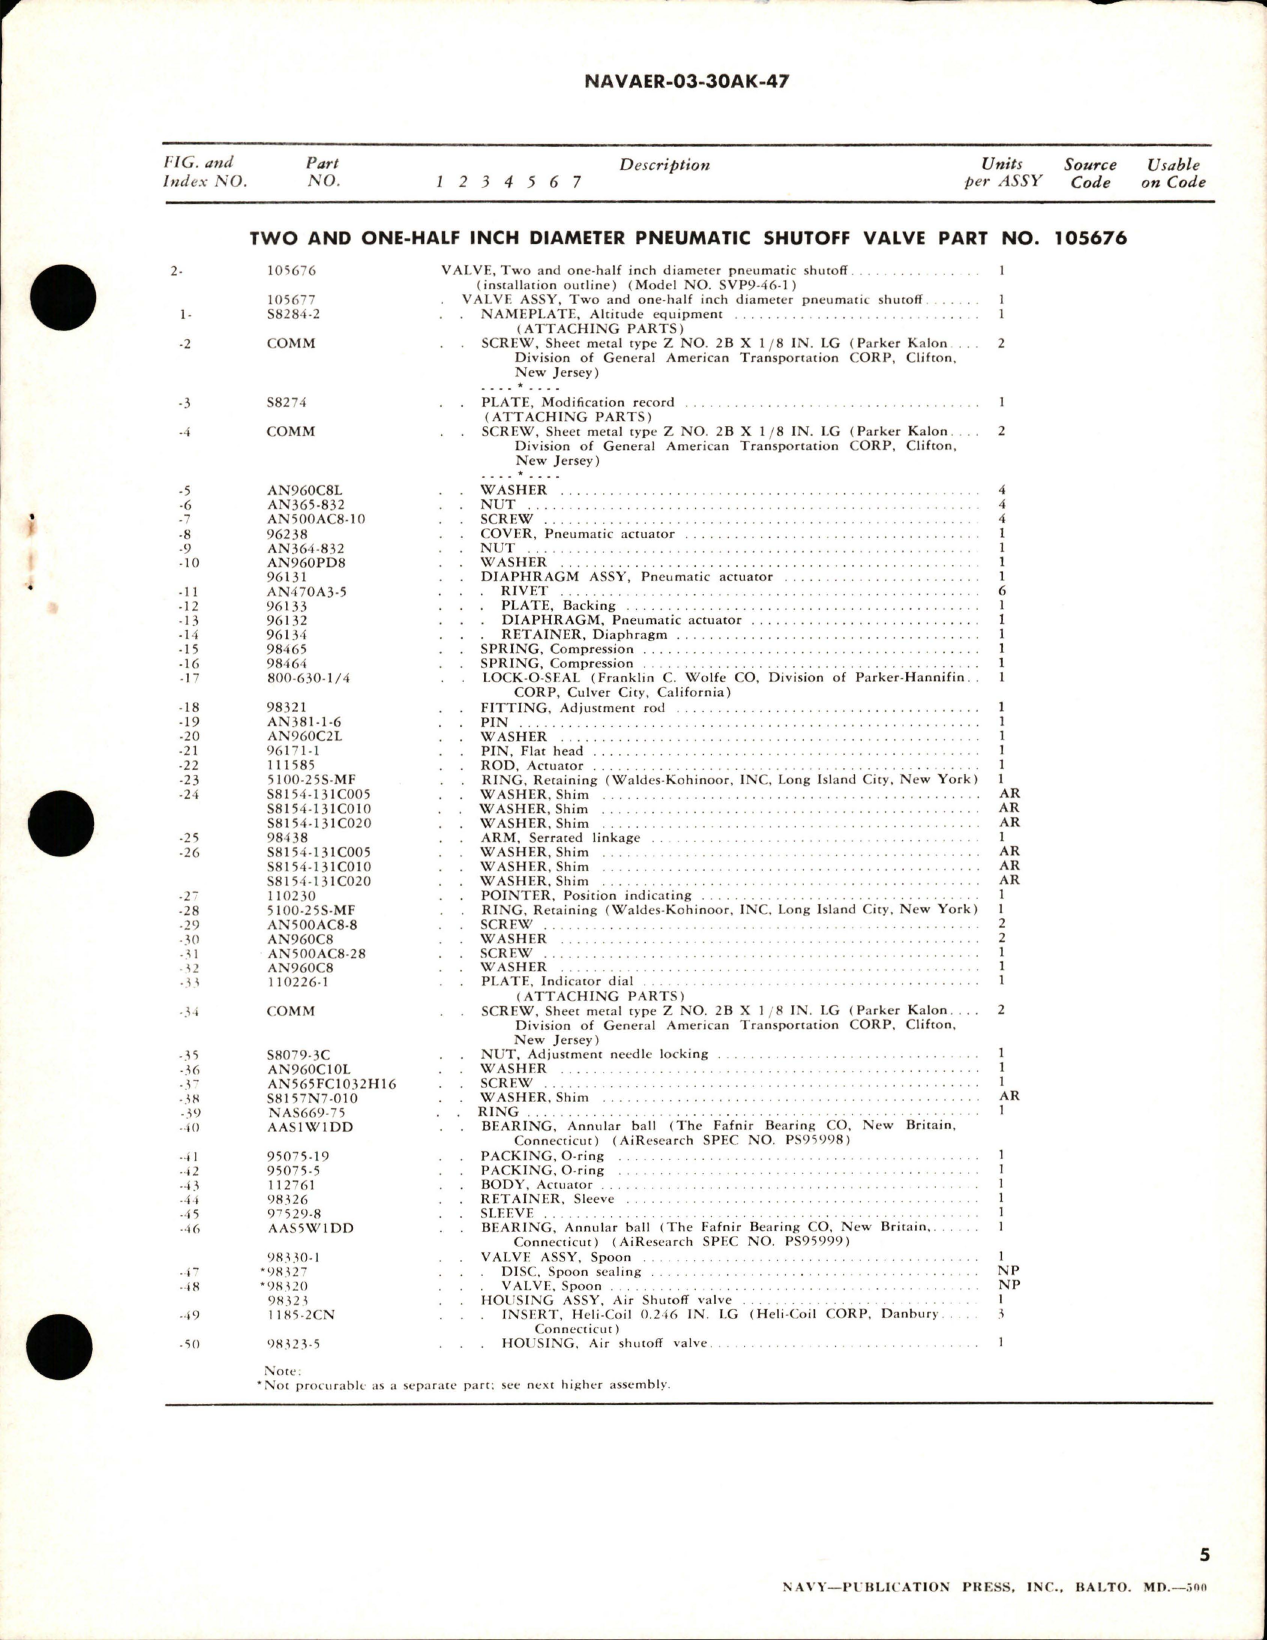 Sample page 5 from AirCorps Library document: Overhaul Instructions with Parts Breakdown for Two and One-Half Inch Diameter Pneumatic Shutoff Valve - Part 105676 